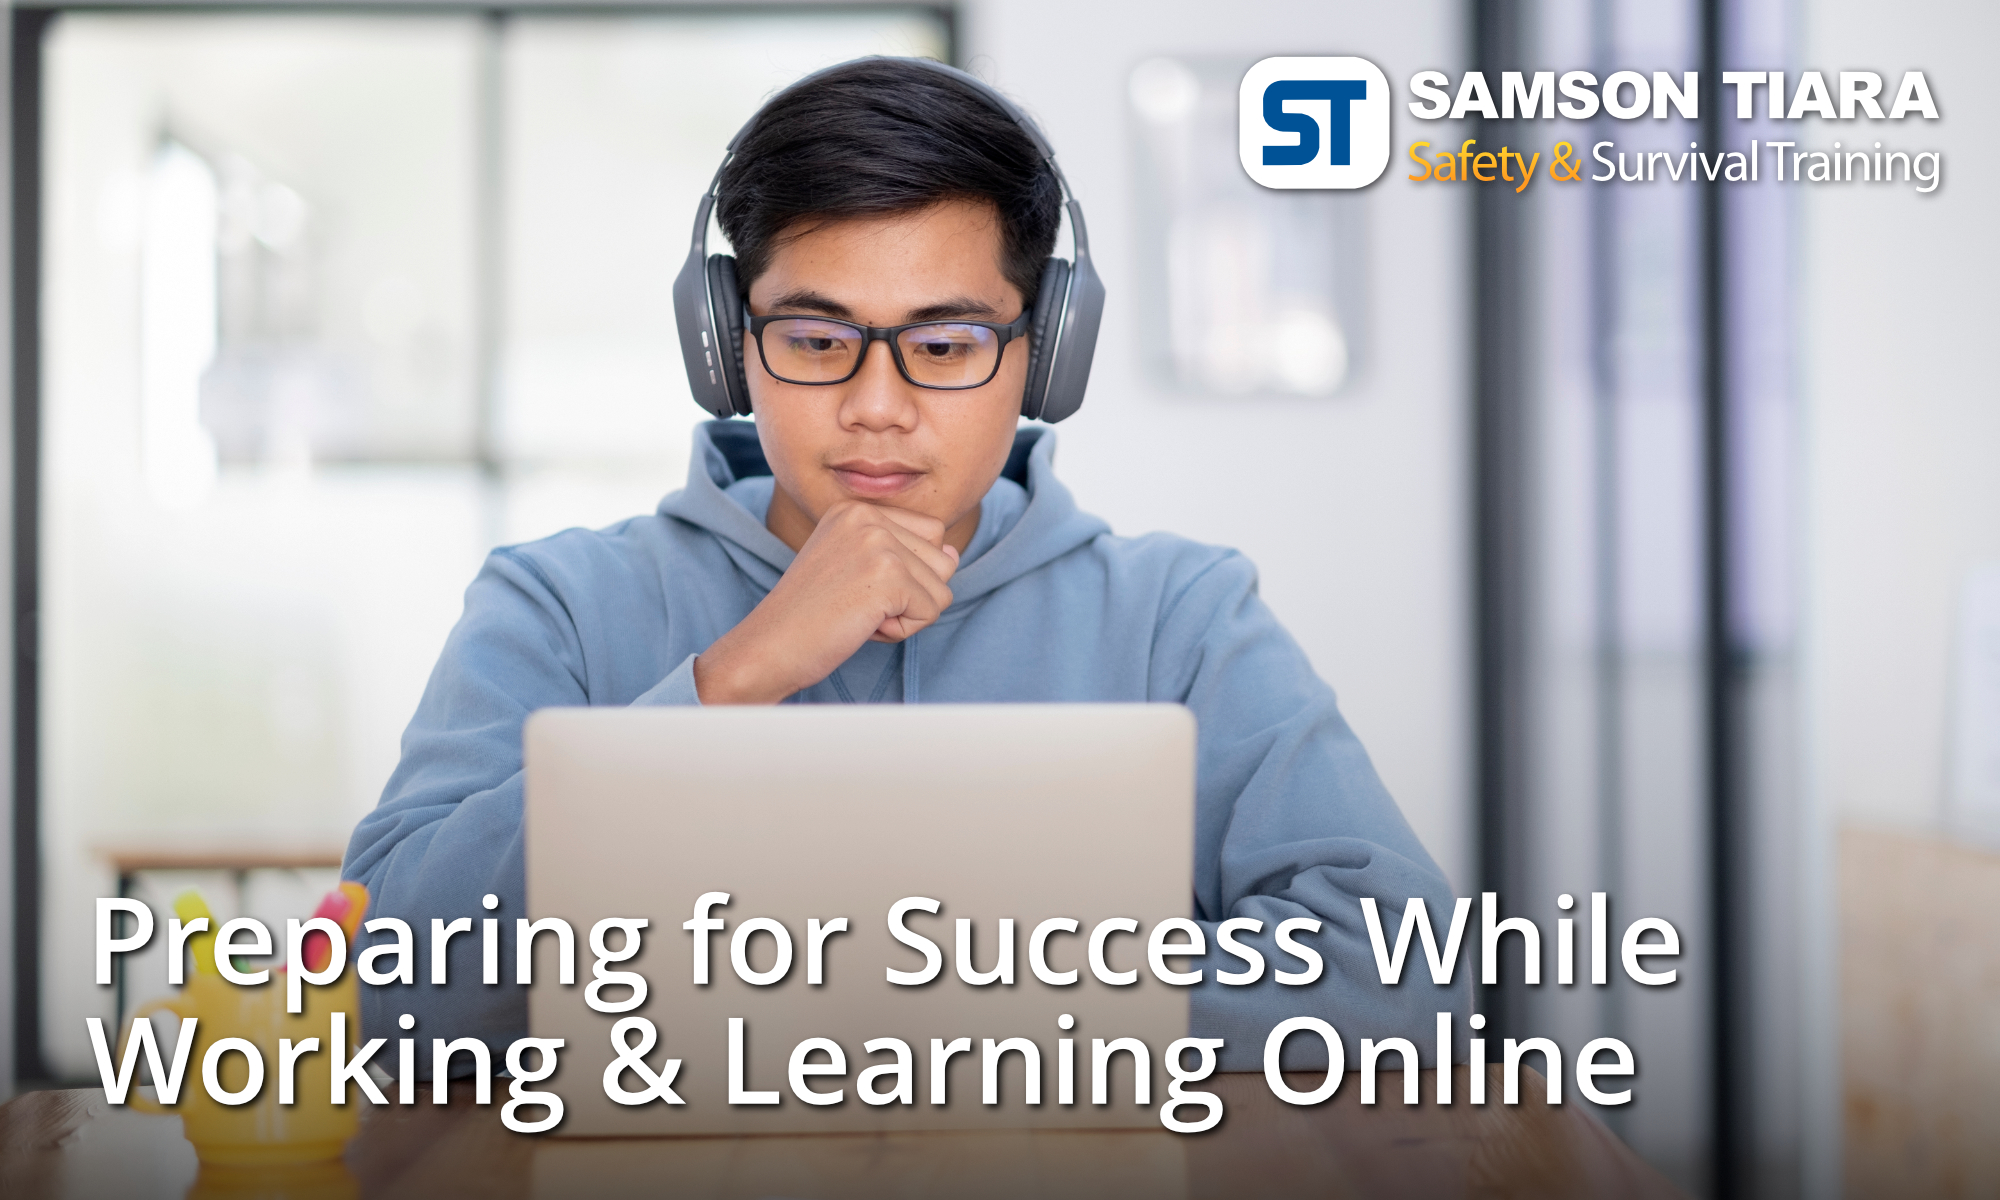 Preparing for Success When Working & Learning Online